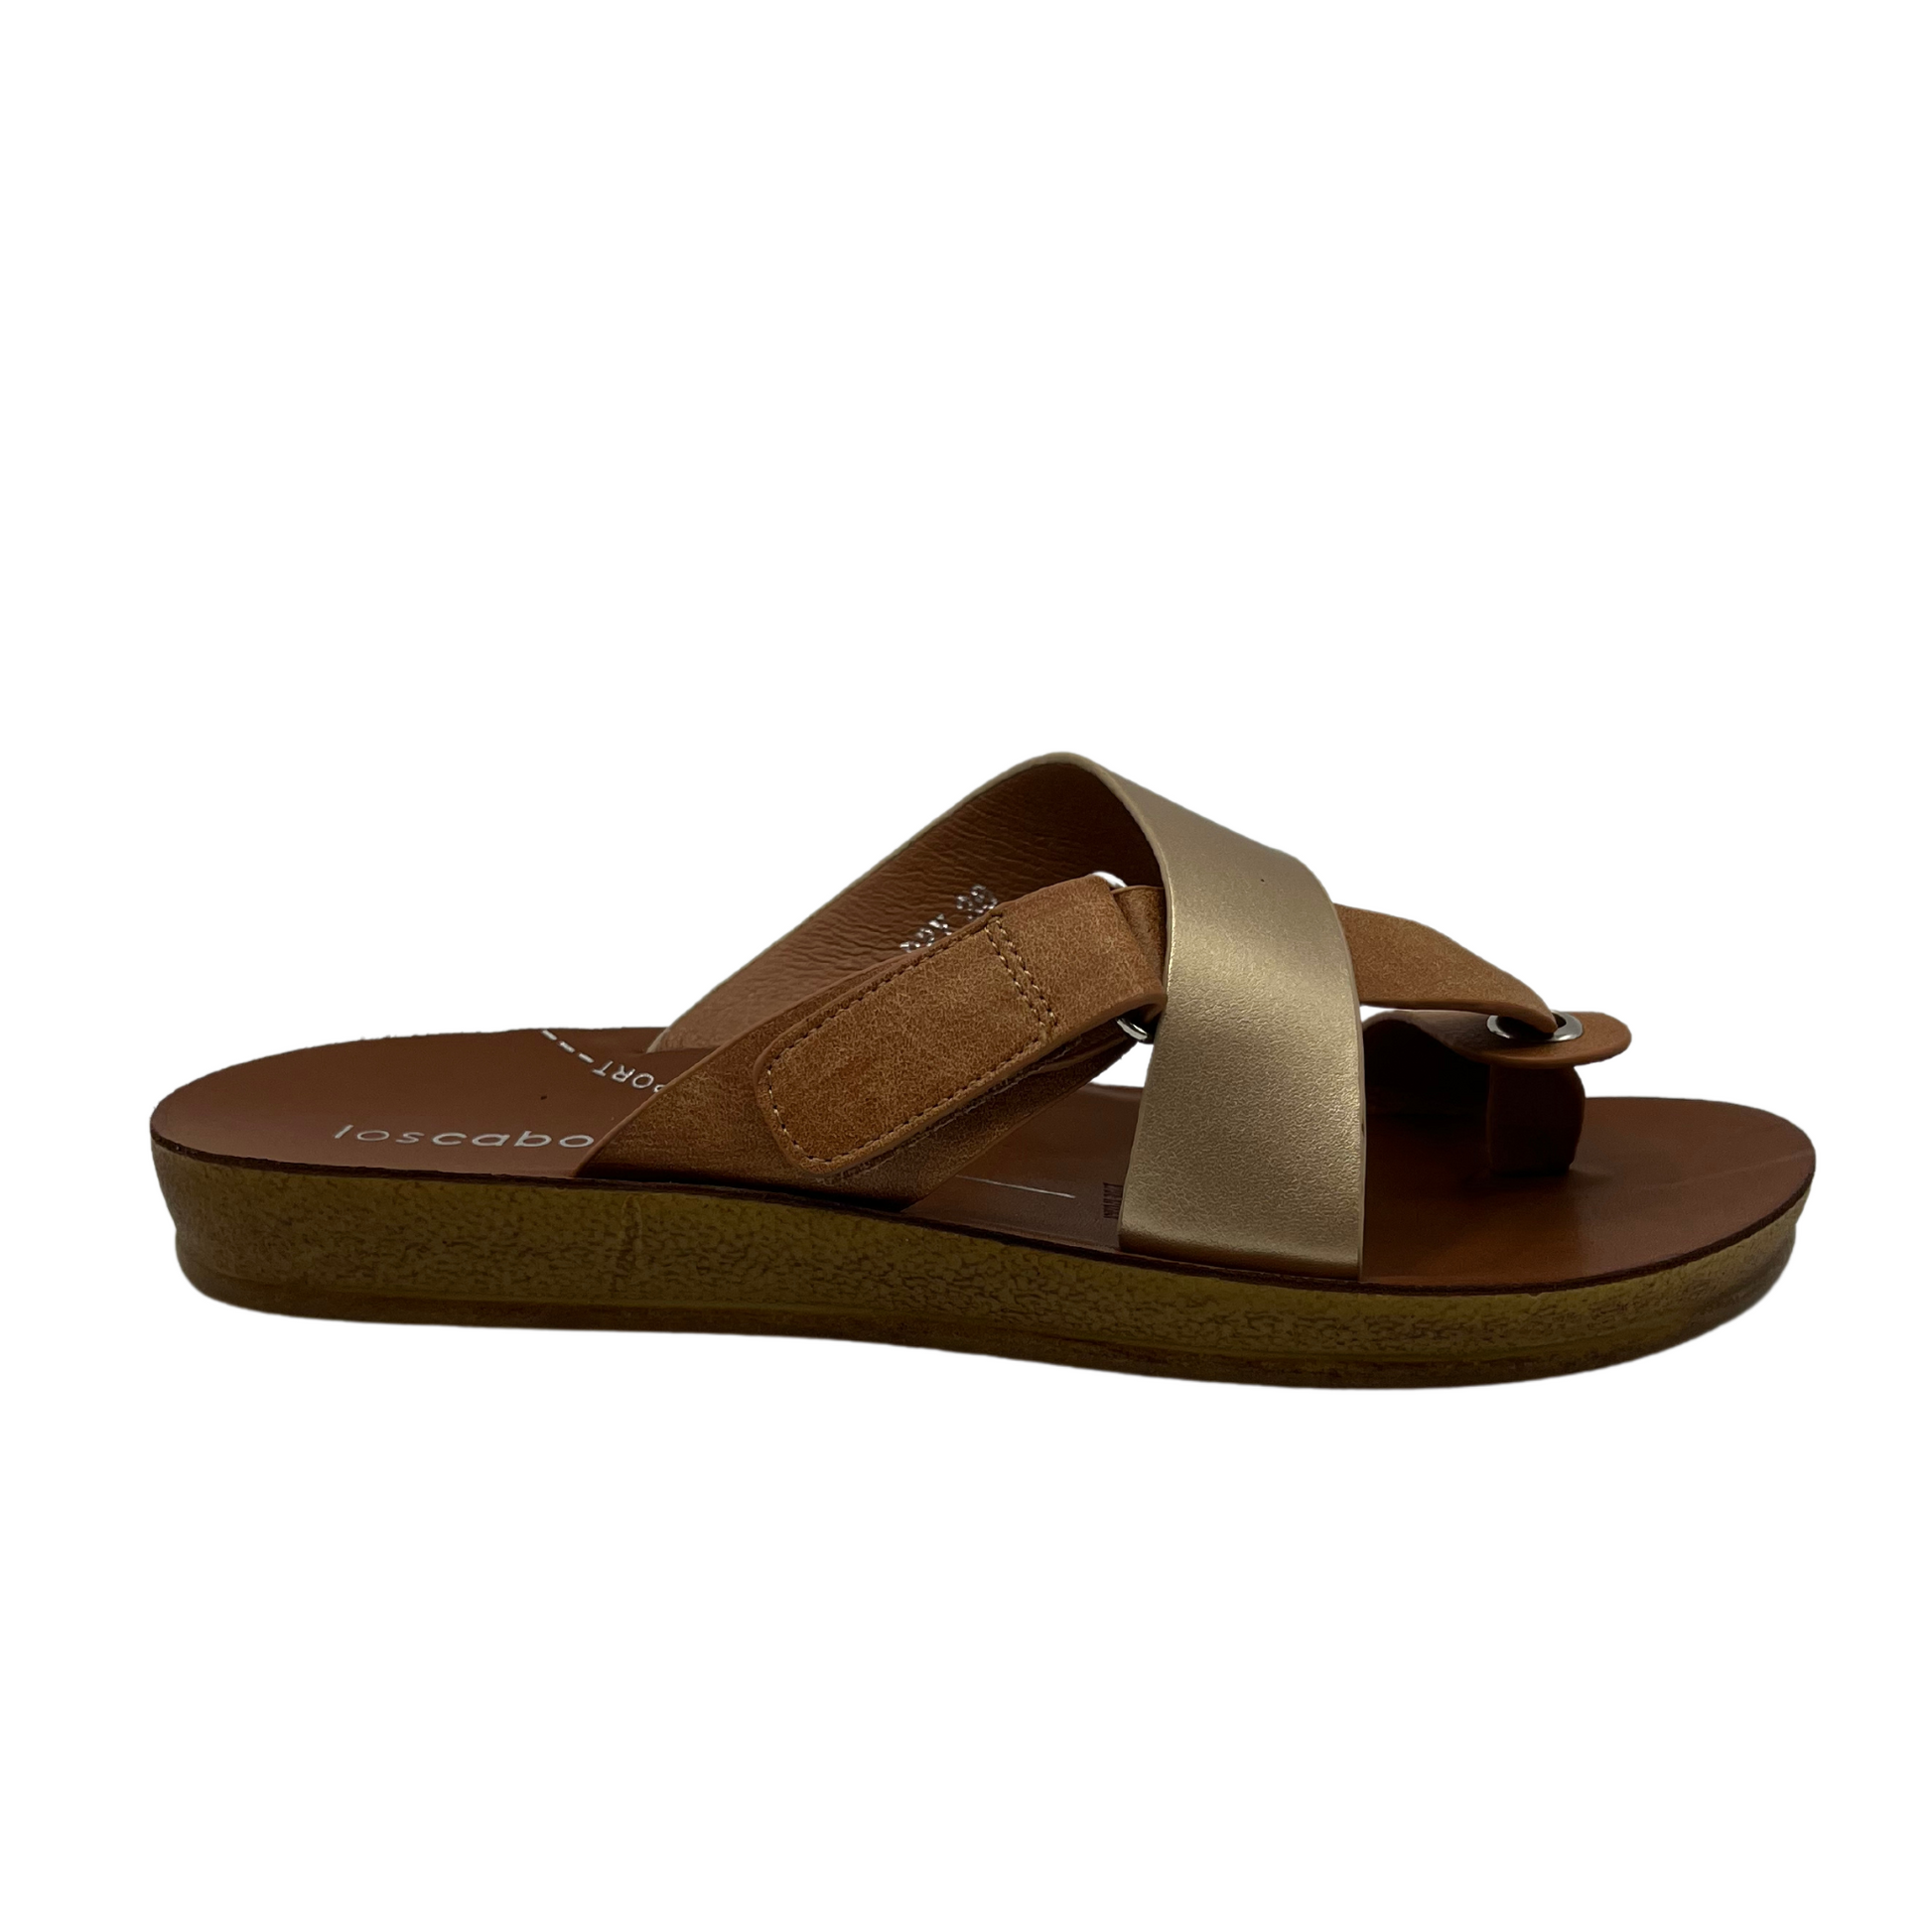 Right facing view of brown and gold strapped sandal with toe strap and velcro closure